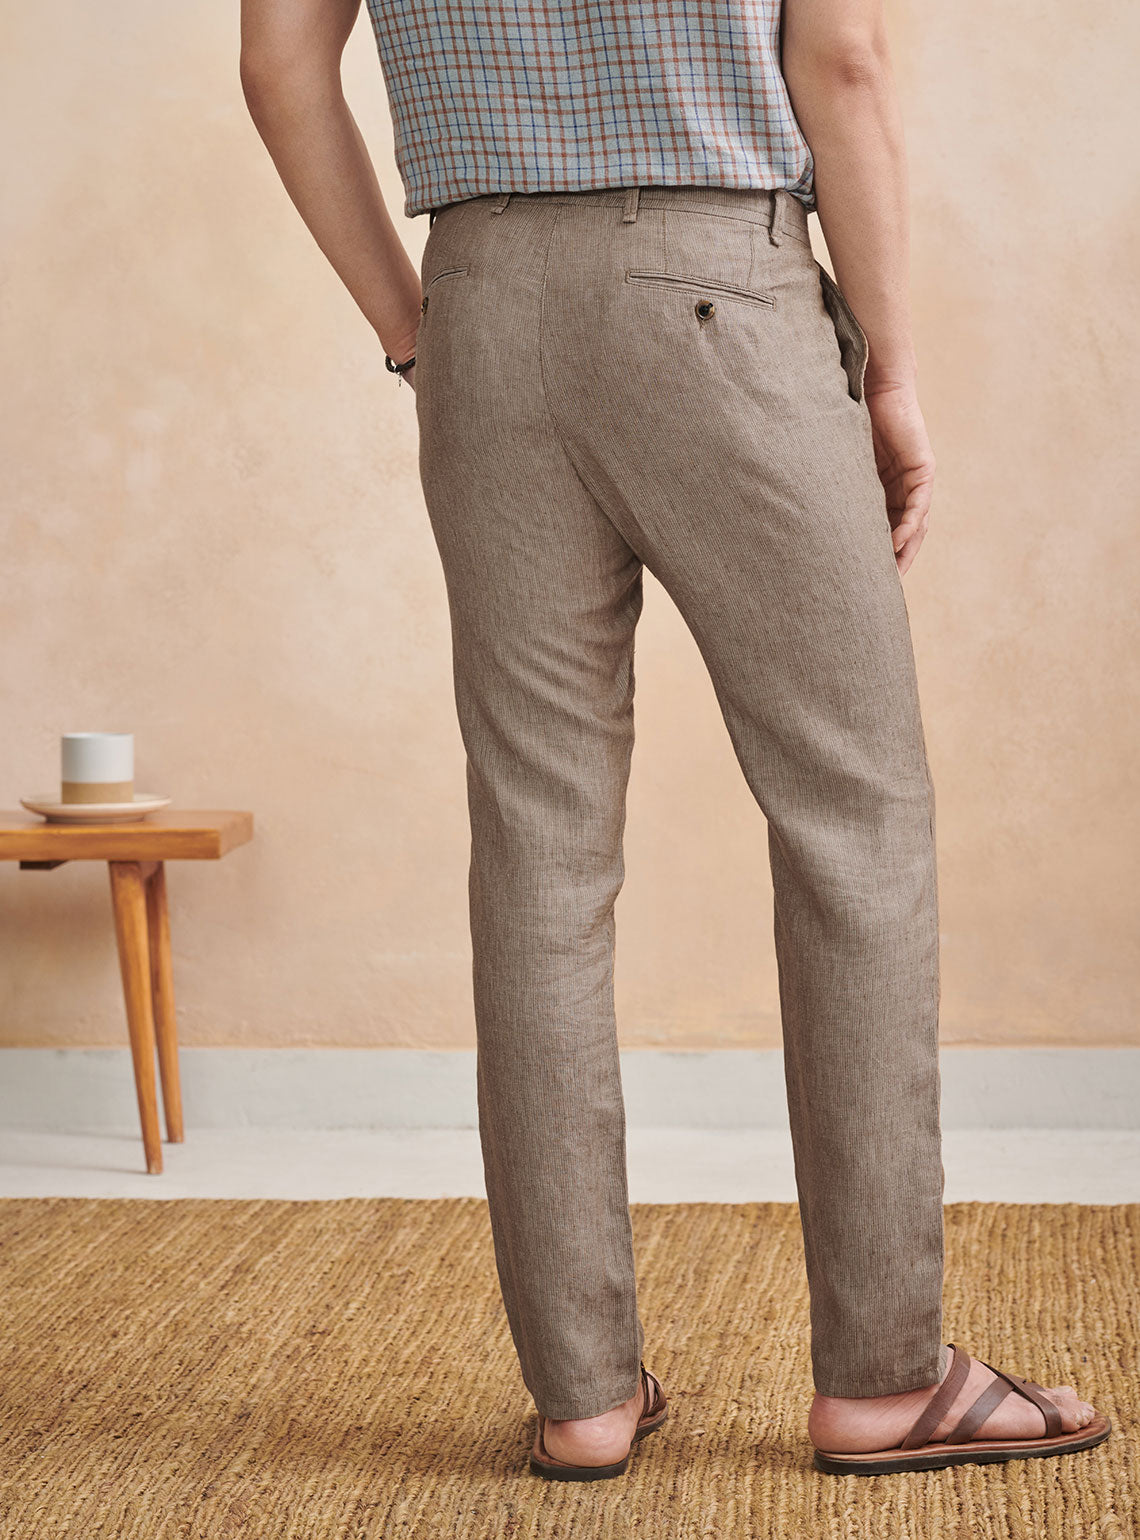 Mens Trousers  Buy Linen Trousers for Men Online with Upto 50 Off  Linen  Club